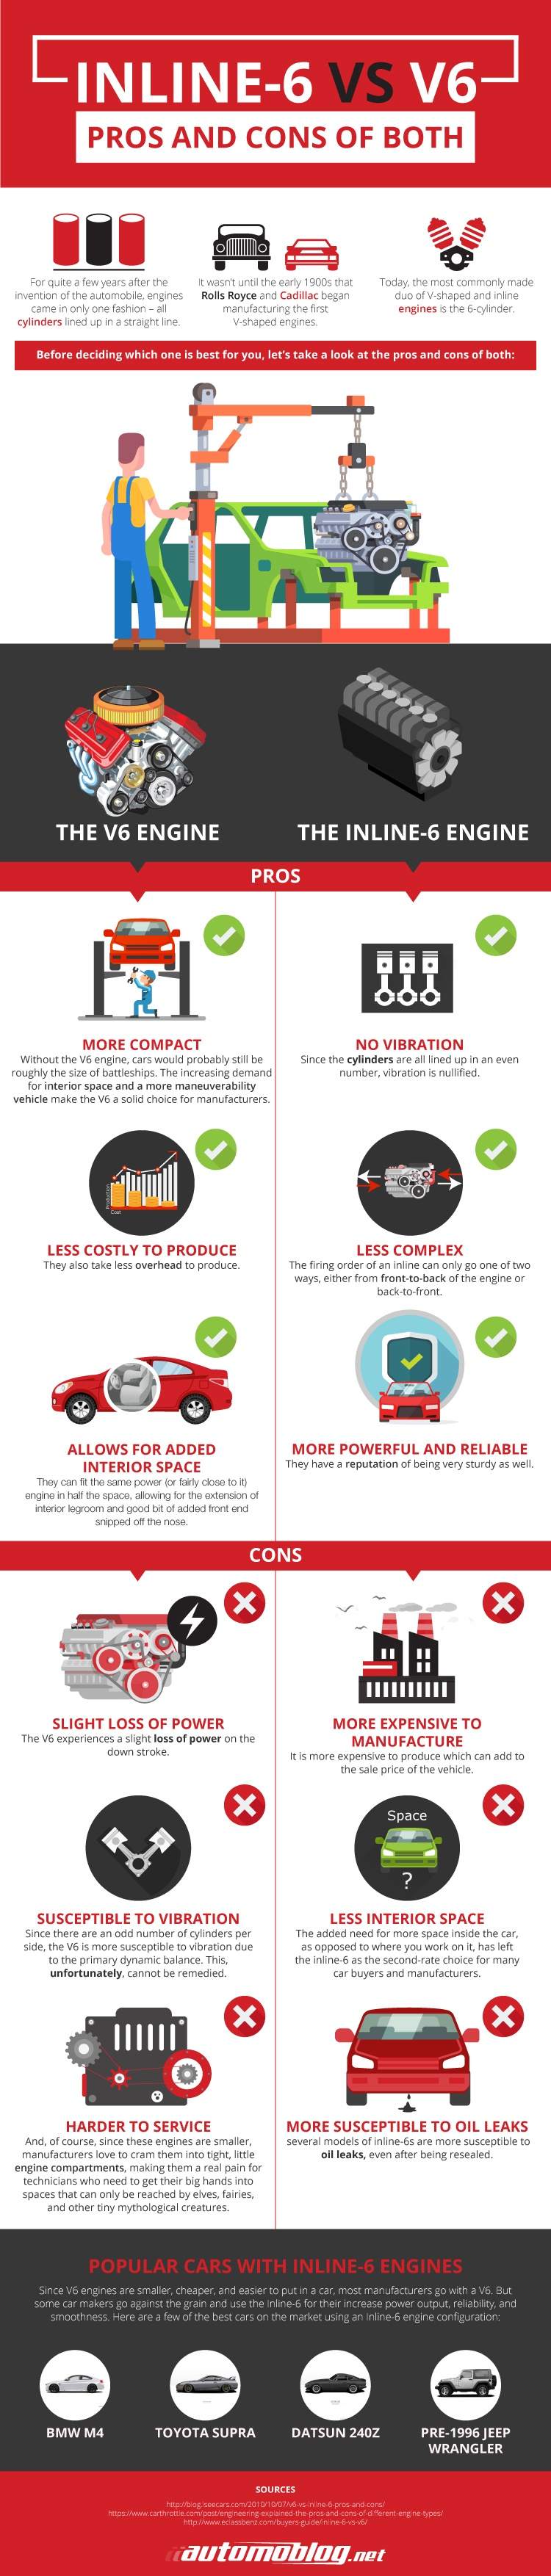 In-line six-cylinder engine and V6 engine: the advantages and disadvantages of the two (infographic)